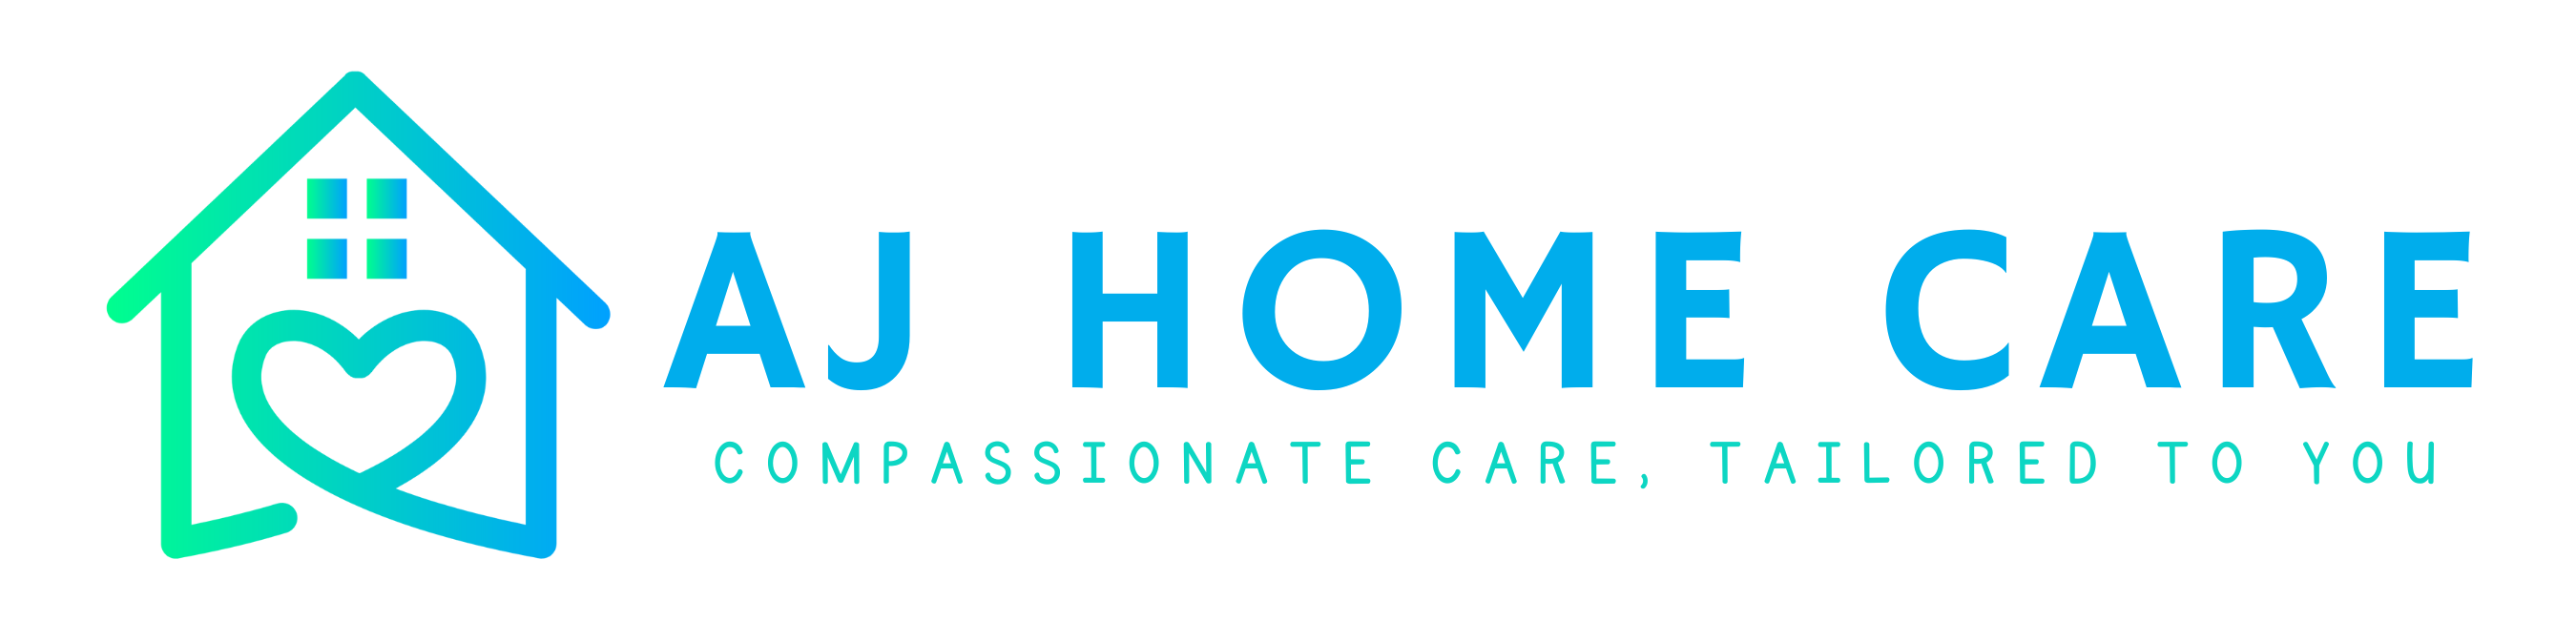 cropped-AJ-HOME-CARE-COMPASSIONATE-CARE-TAILORED-TO-YOU.png